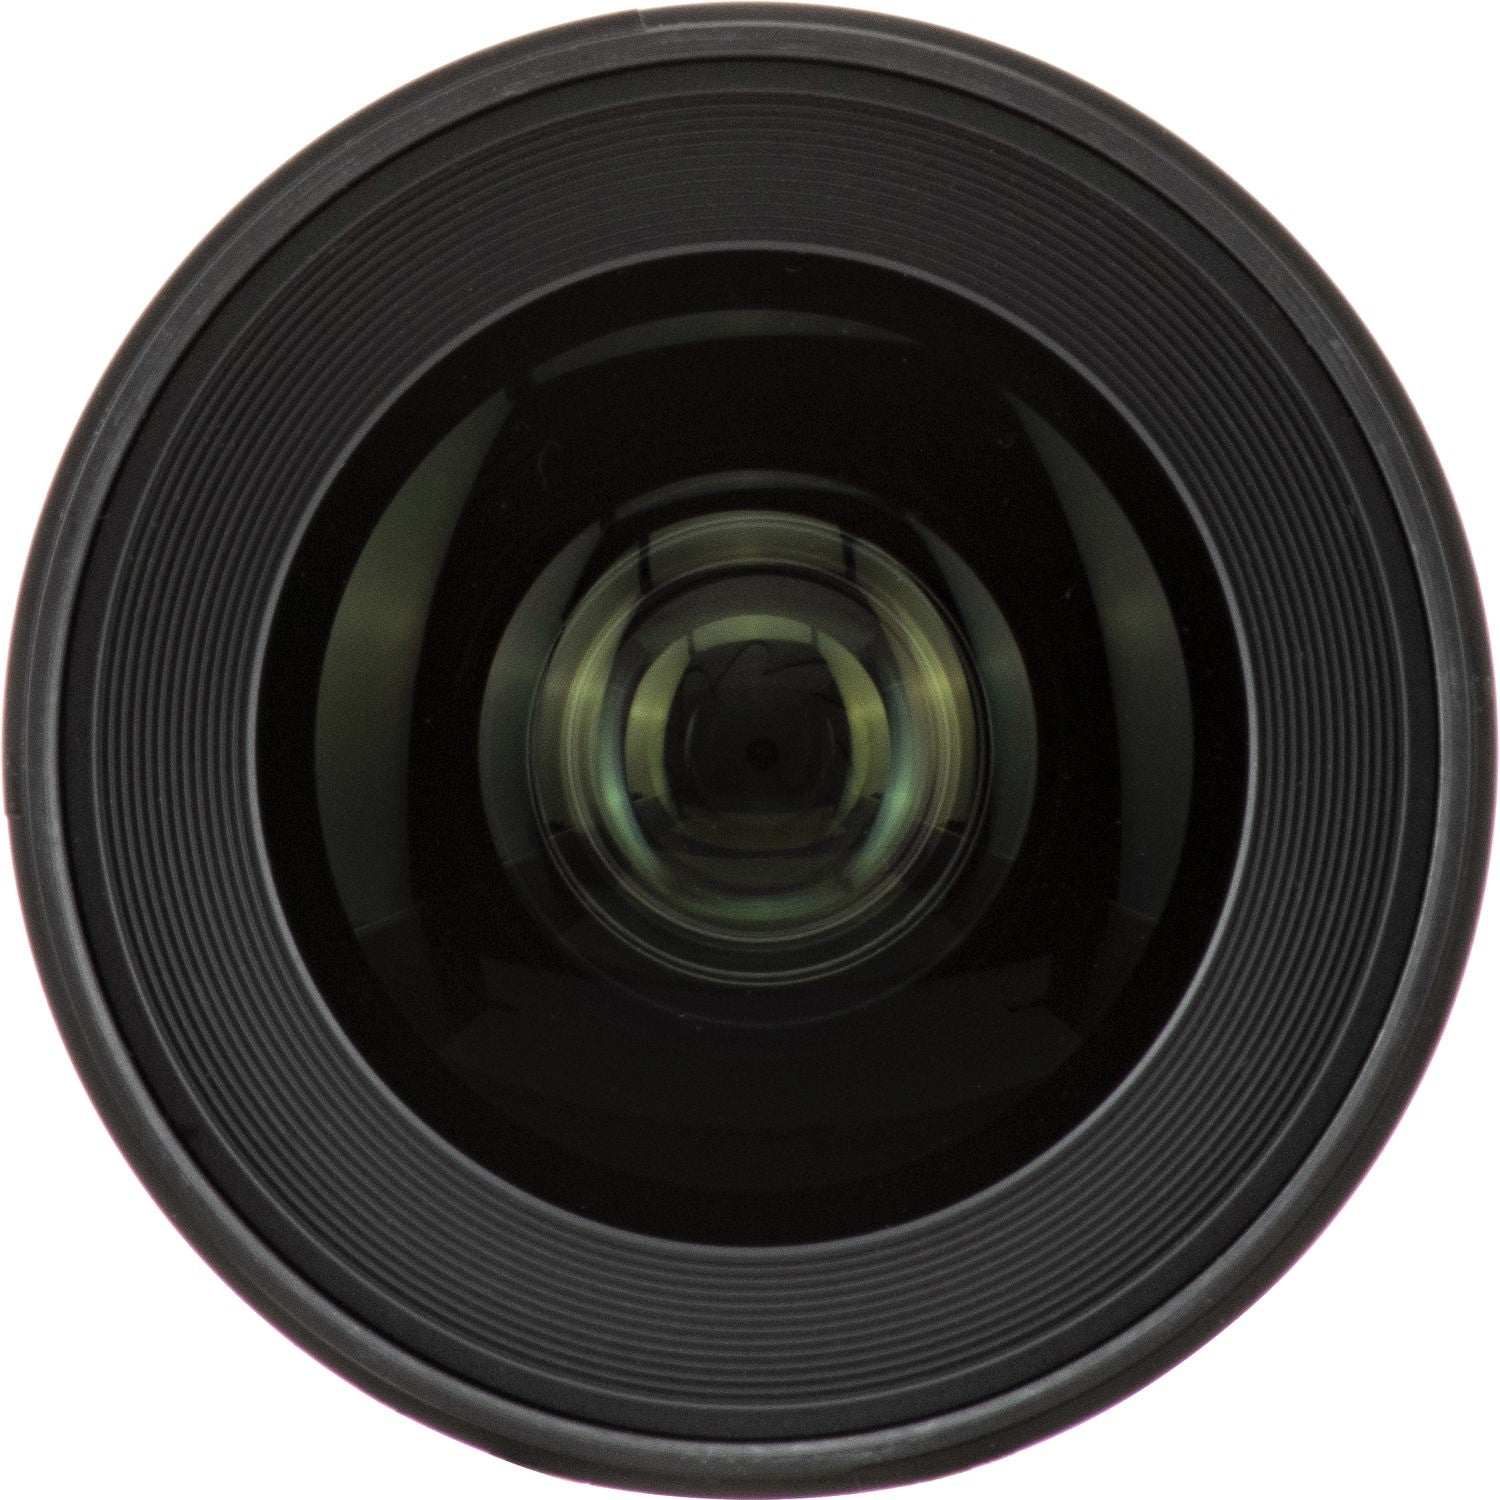 Sigma 28mm F1.4 DG HSM Art Lens for Sony E in a Front Close-Up View